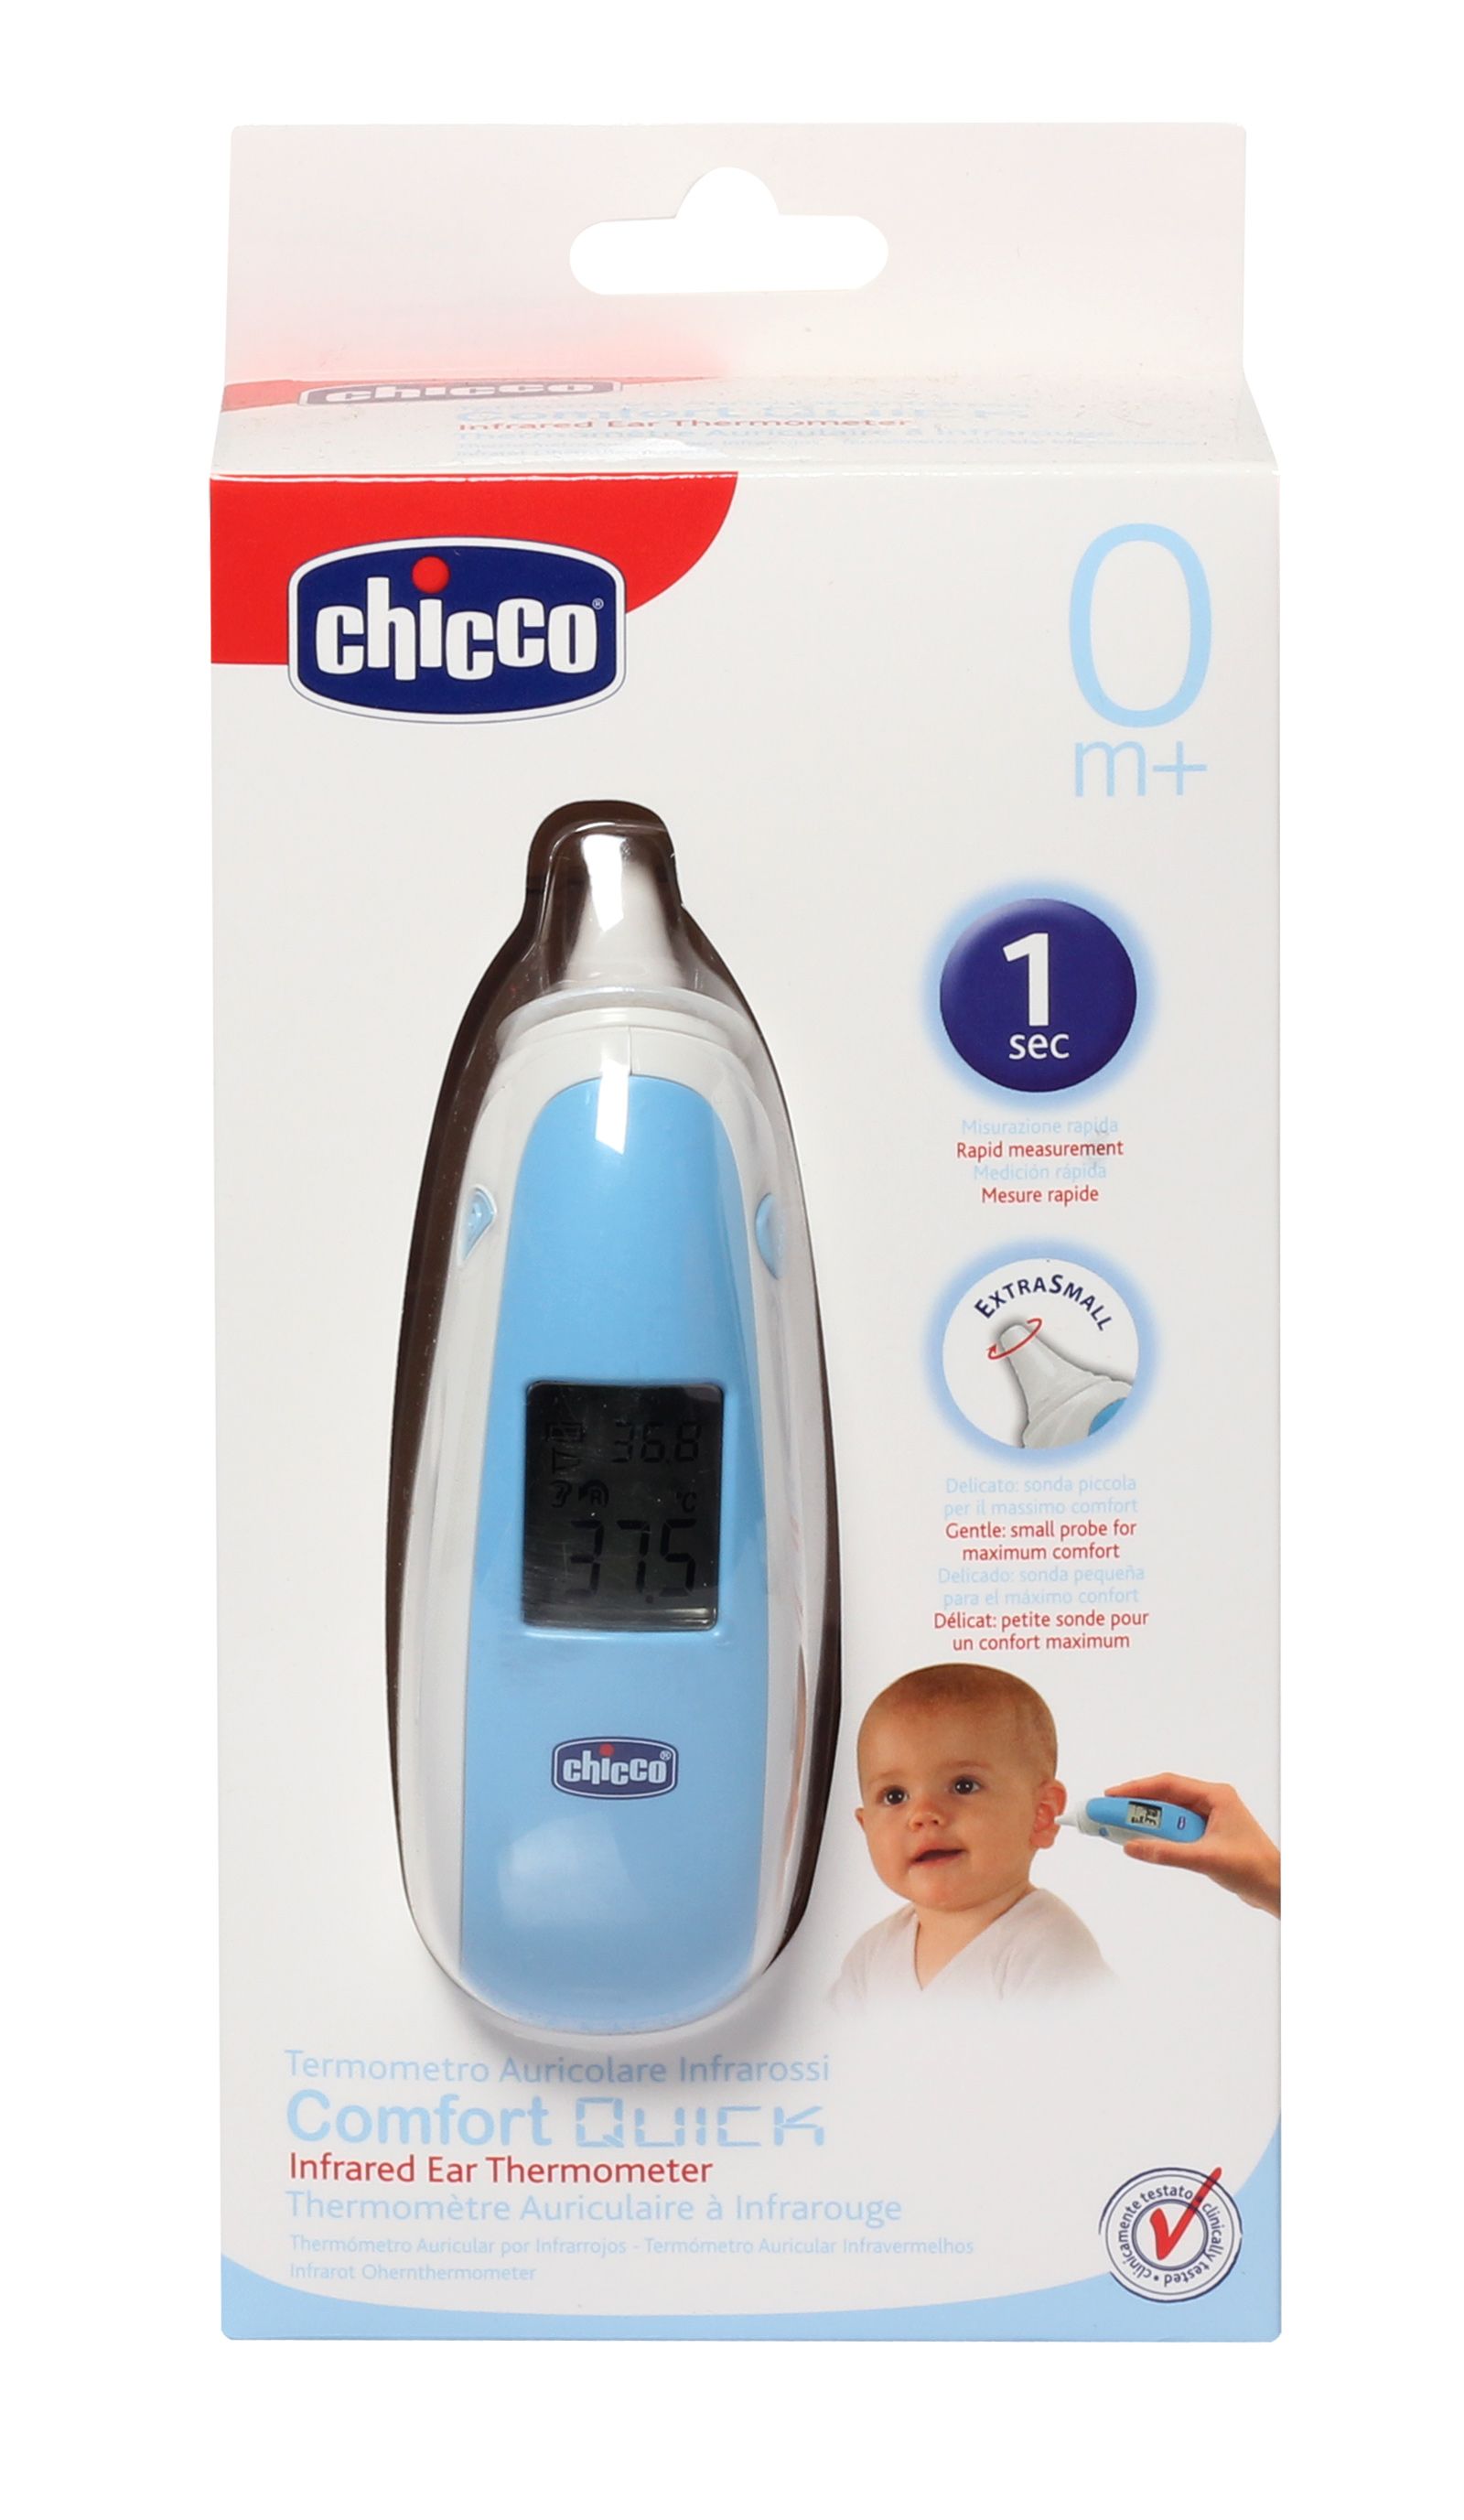 Chicco - Comfort Quick Infrared Ear Thermometer